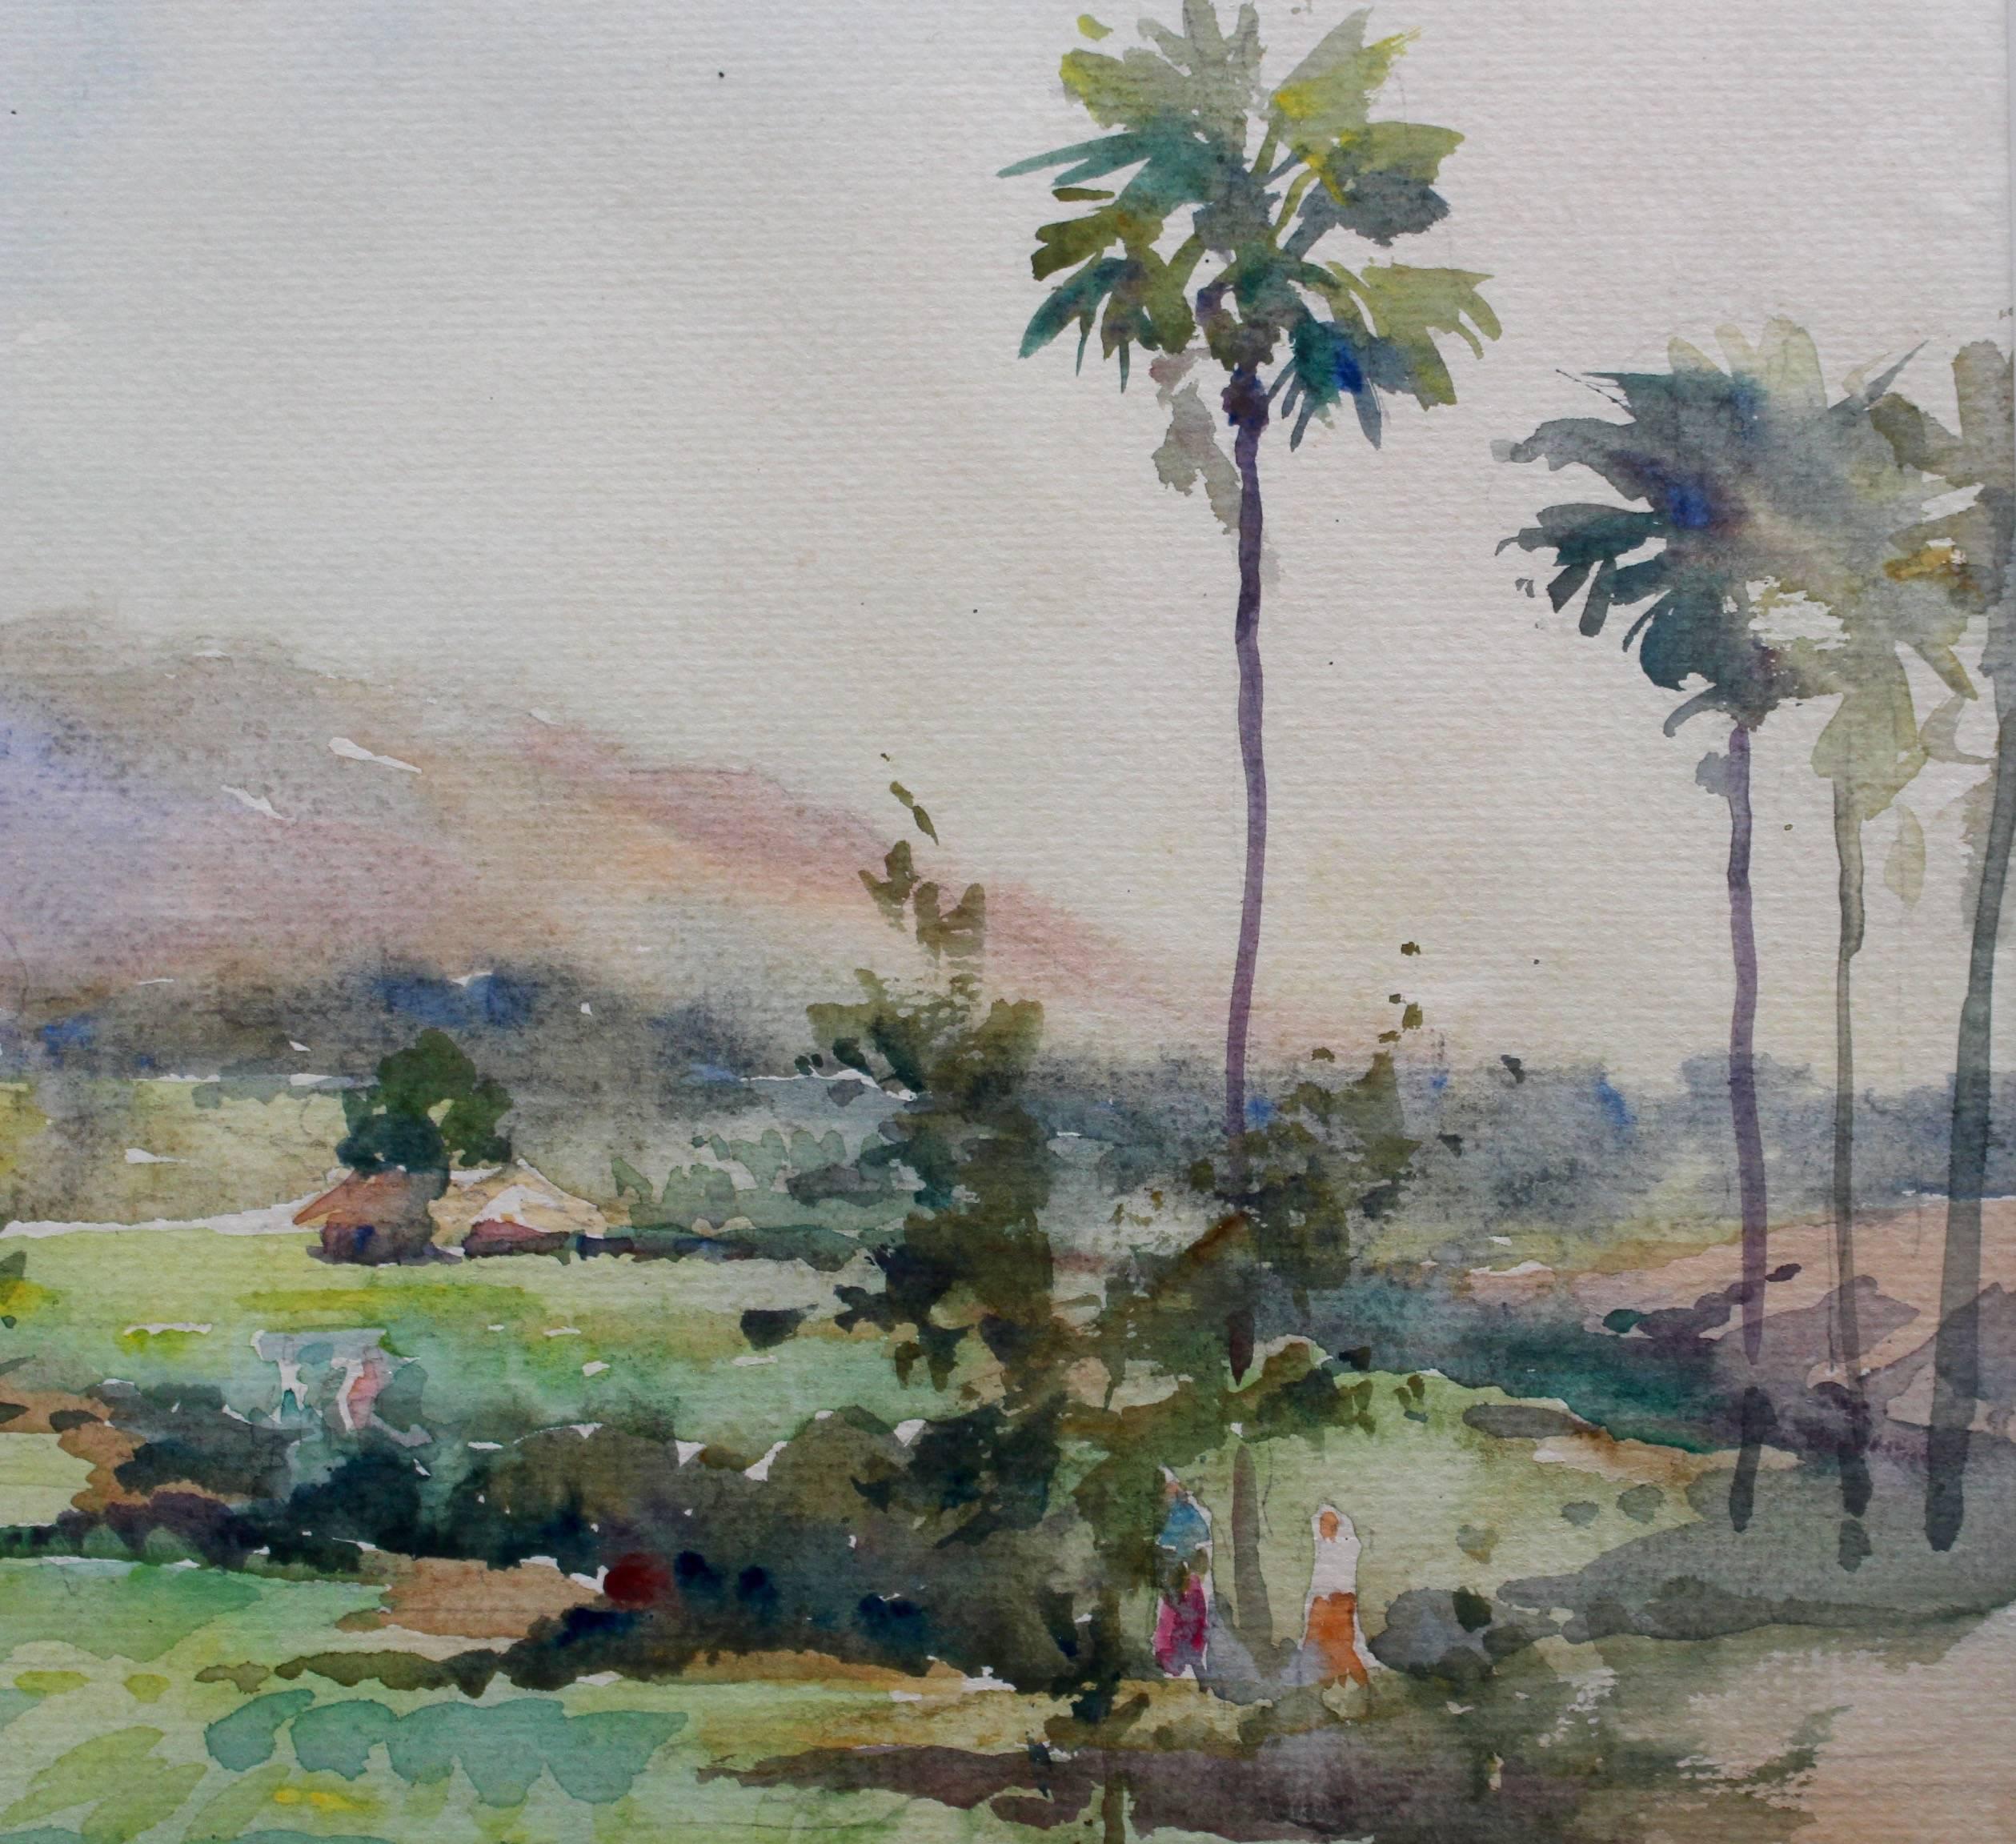 Monywa II - Gray Landscape Painting by Than Aung